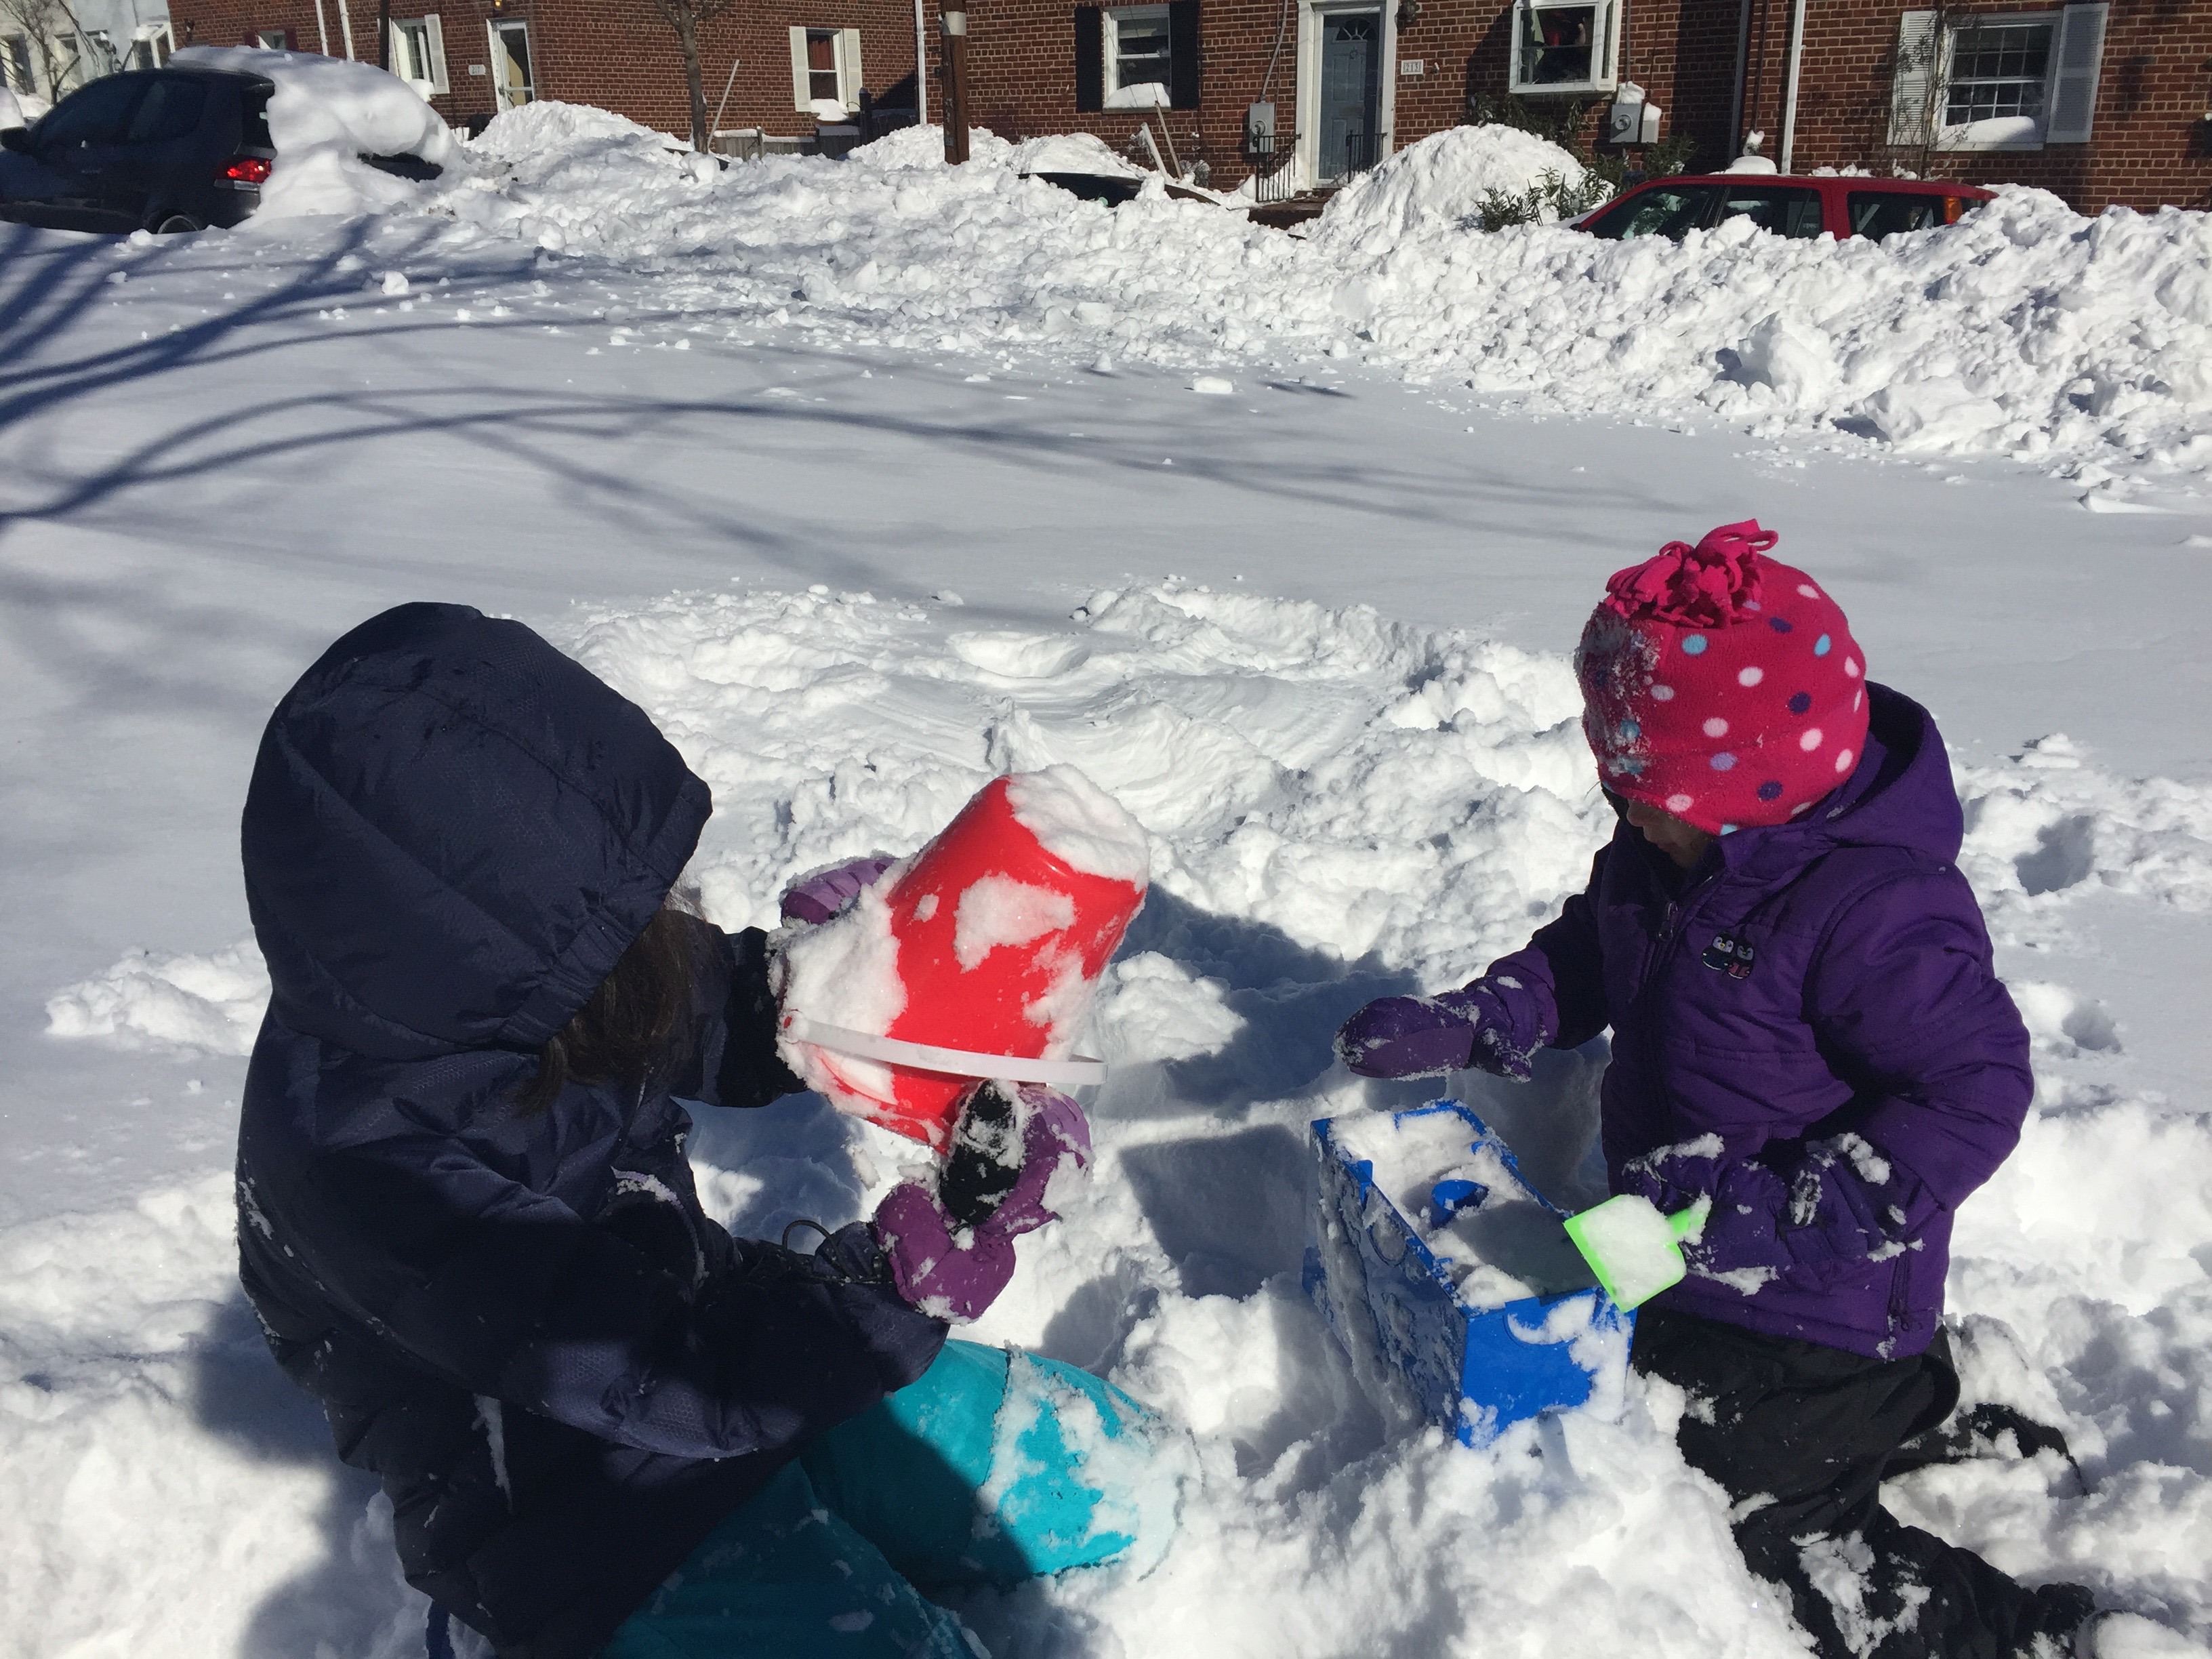 Two children playing in snow wearing snowsuits and hats.